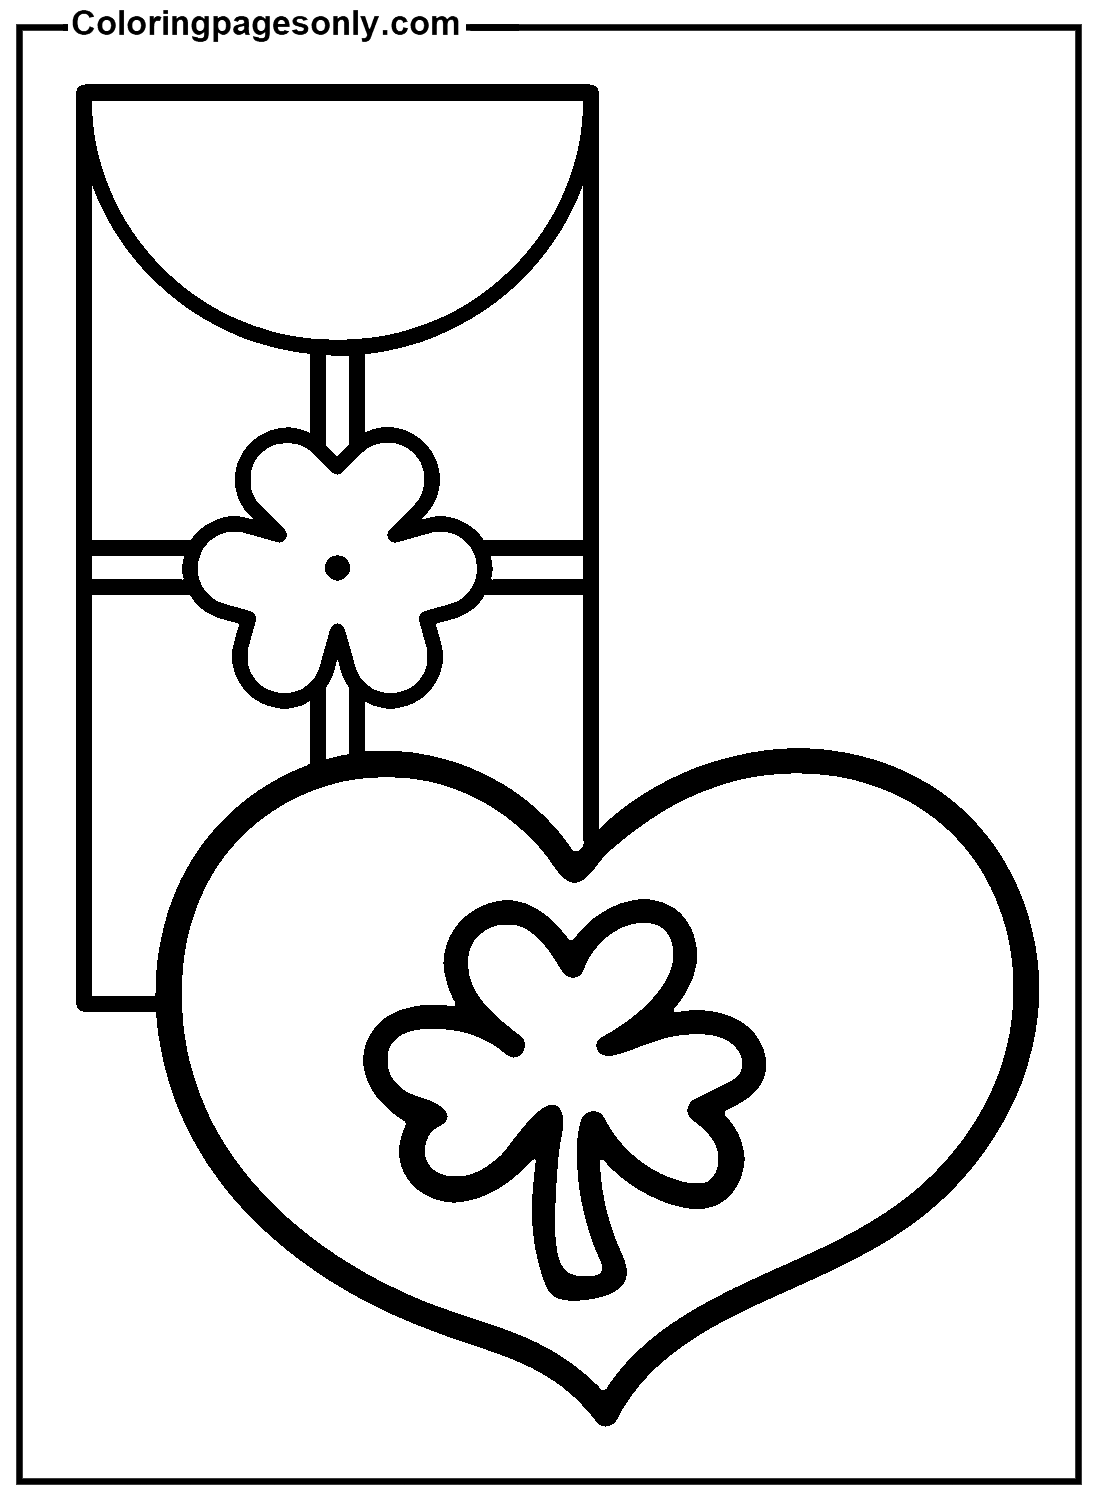 Shamrock With Heart Coloring Pages